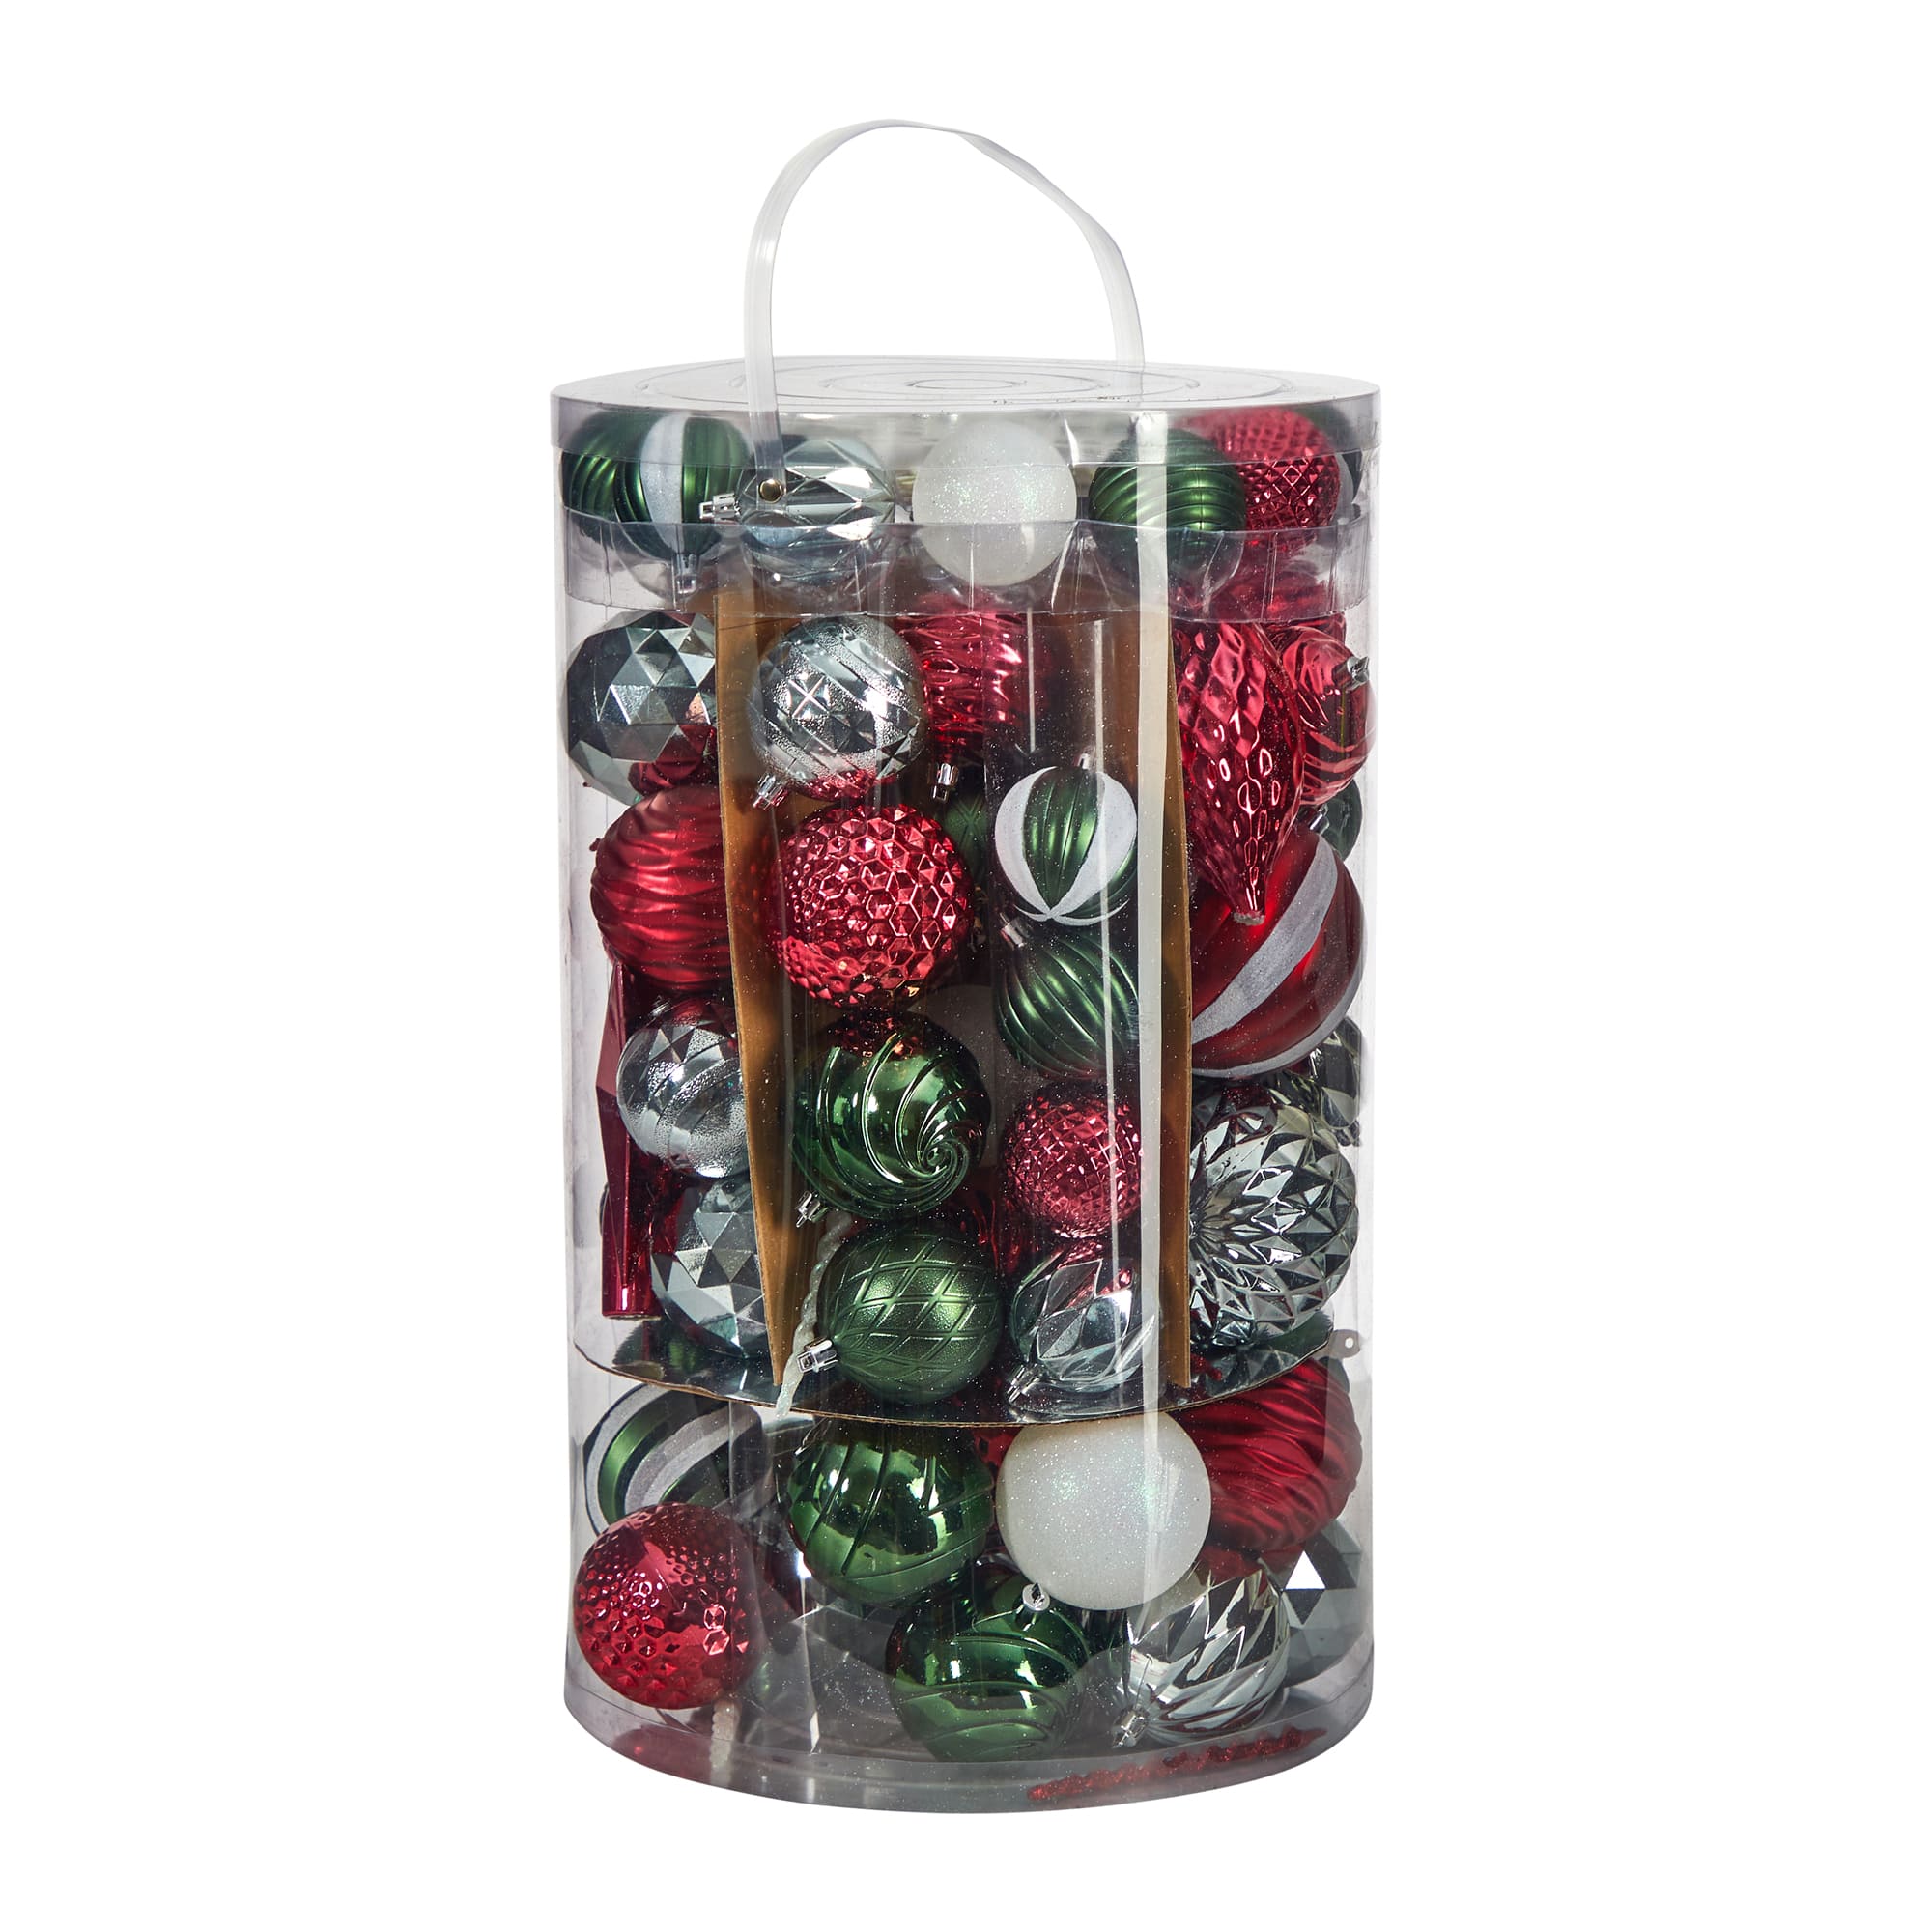 100ct. Holiday Deluxe Shatterproof Christmas Tree Ornament Box Set